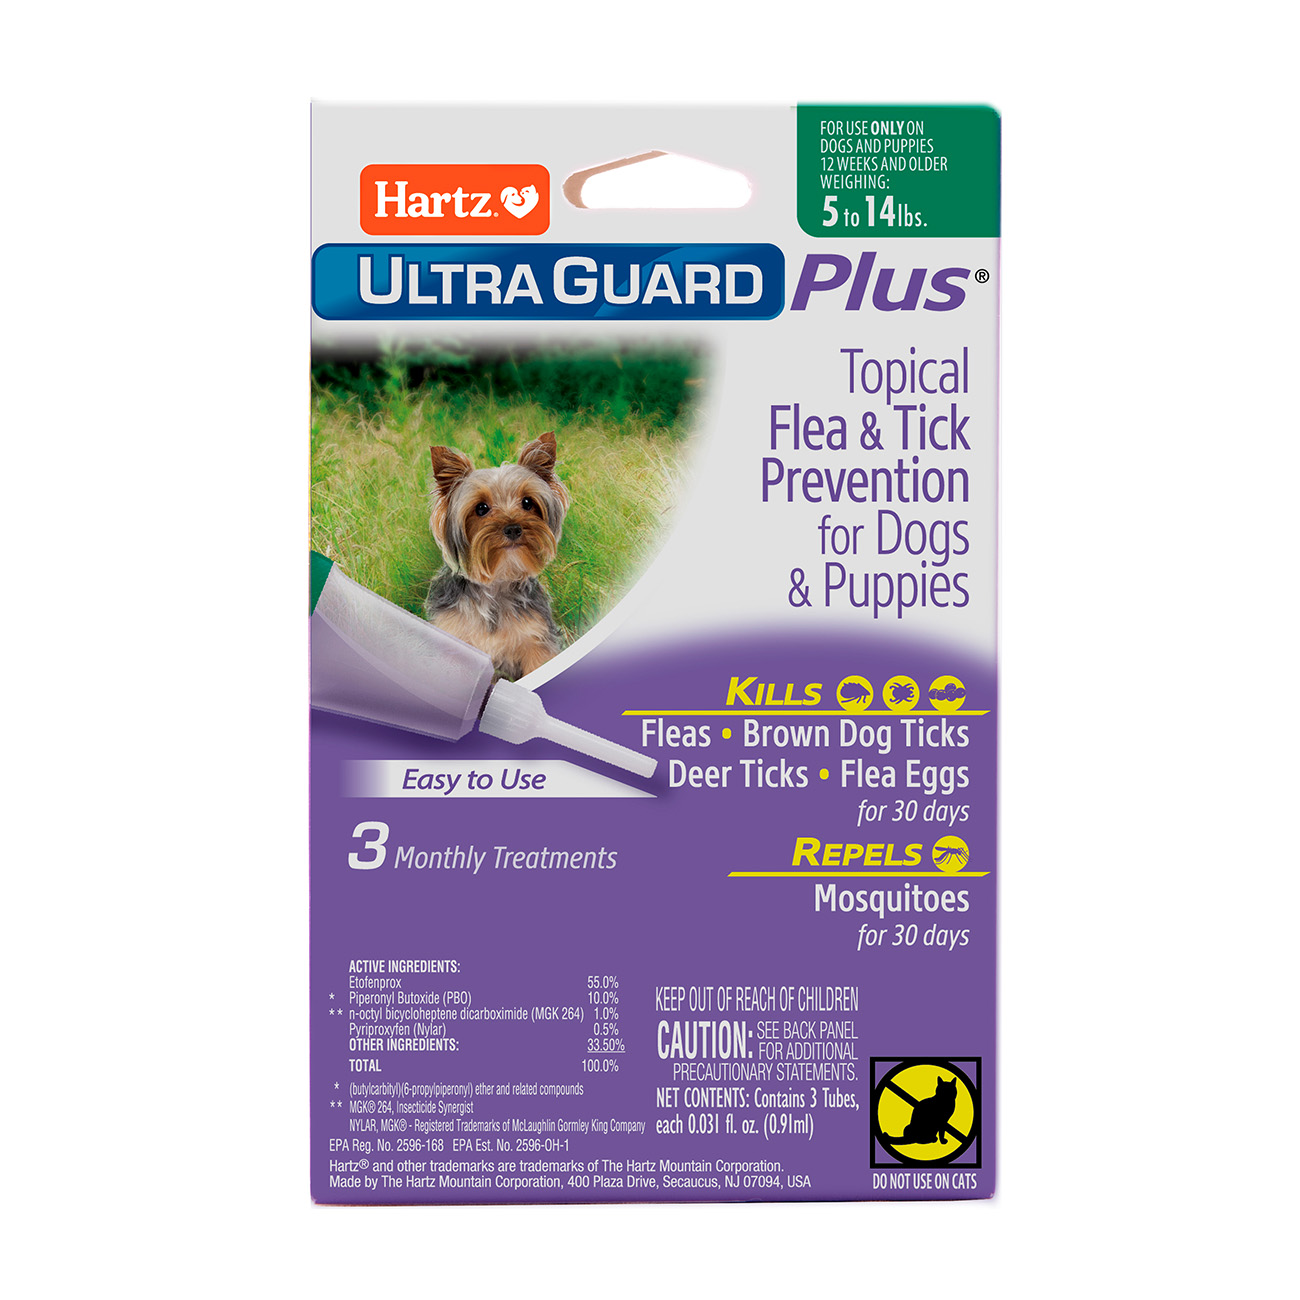 natural-flea-and-tick-for-dogs-online-offers-save-62-jlcatj-gob-mx